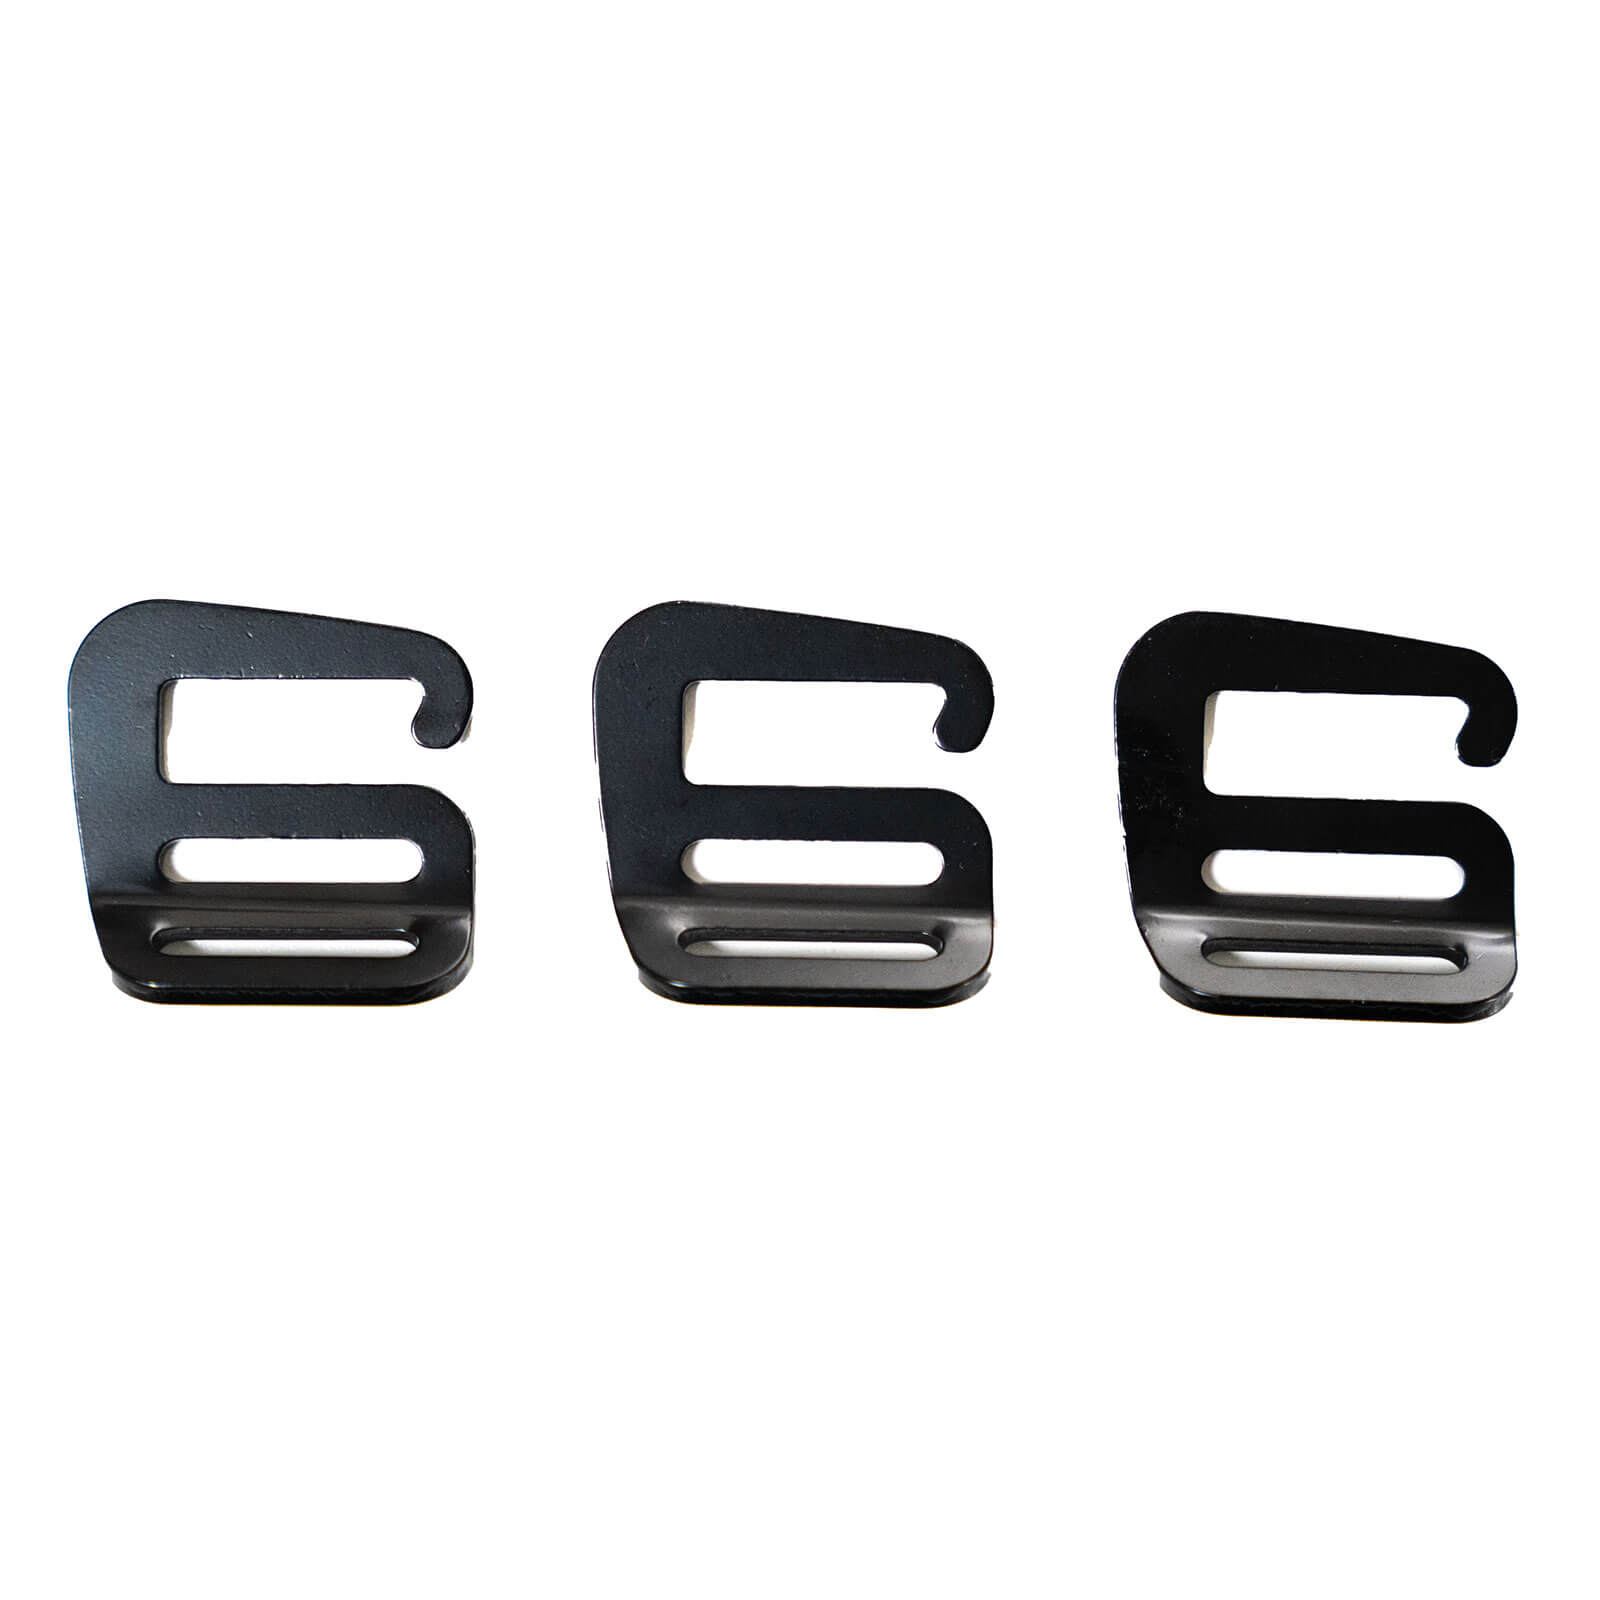 G-Hook Replacement Buckles